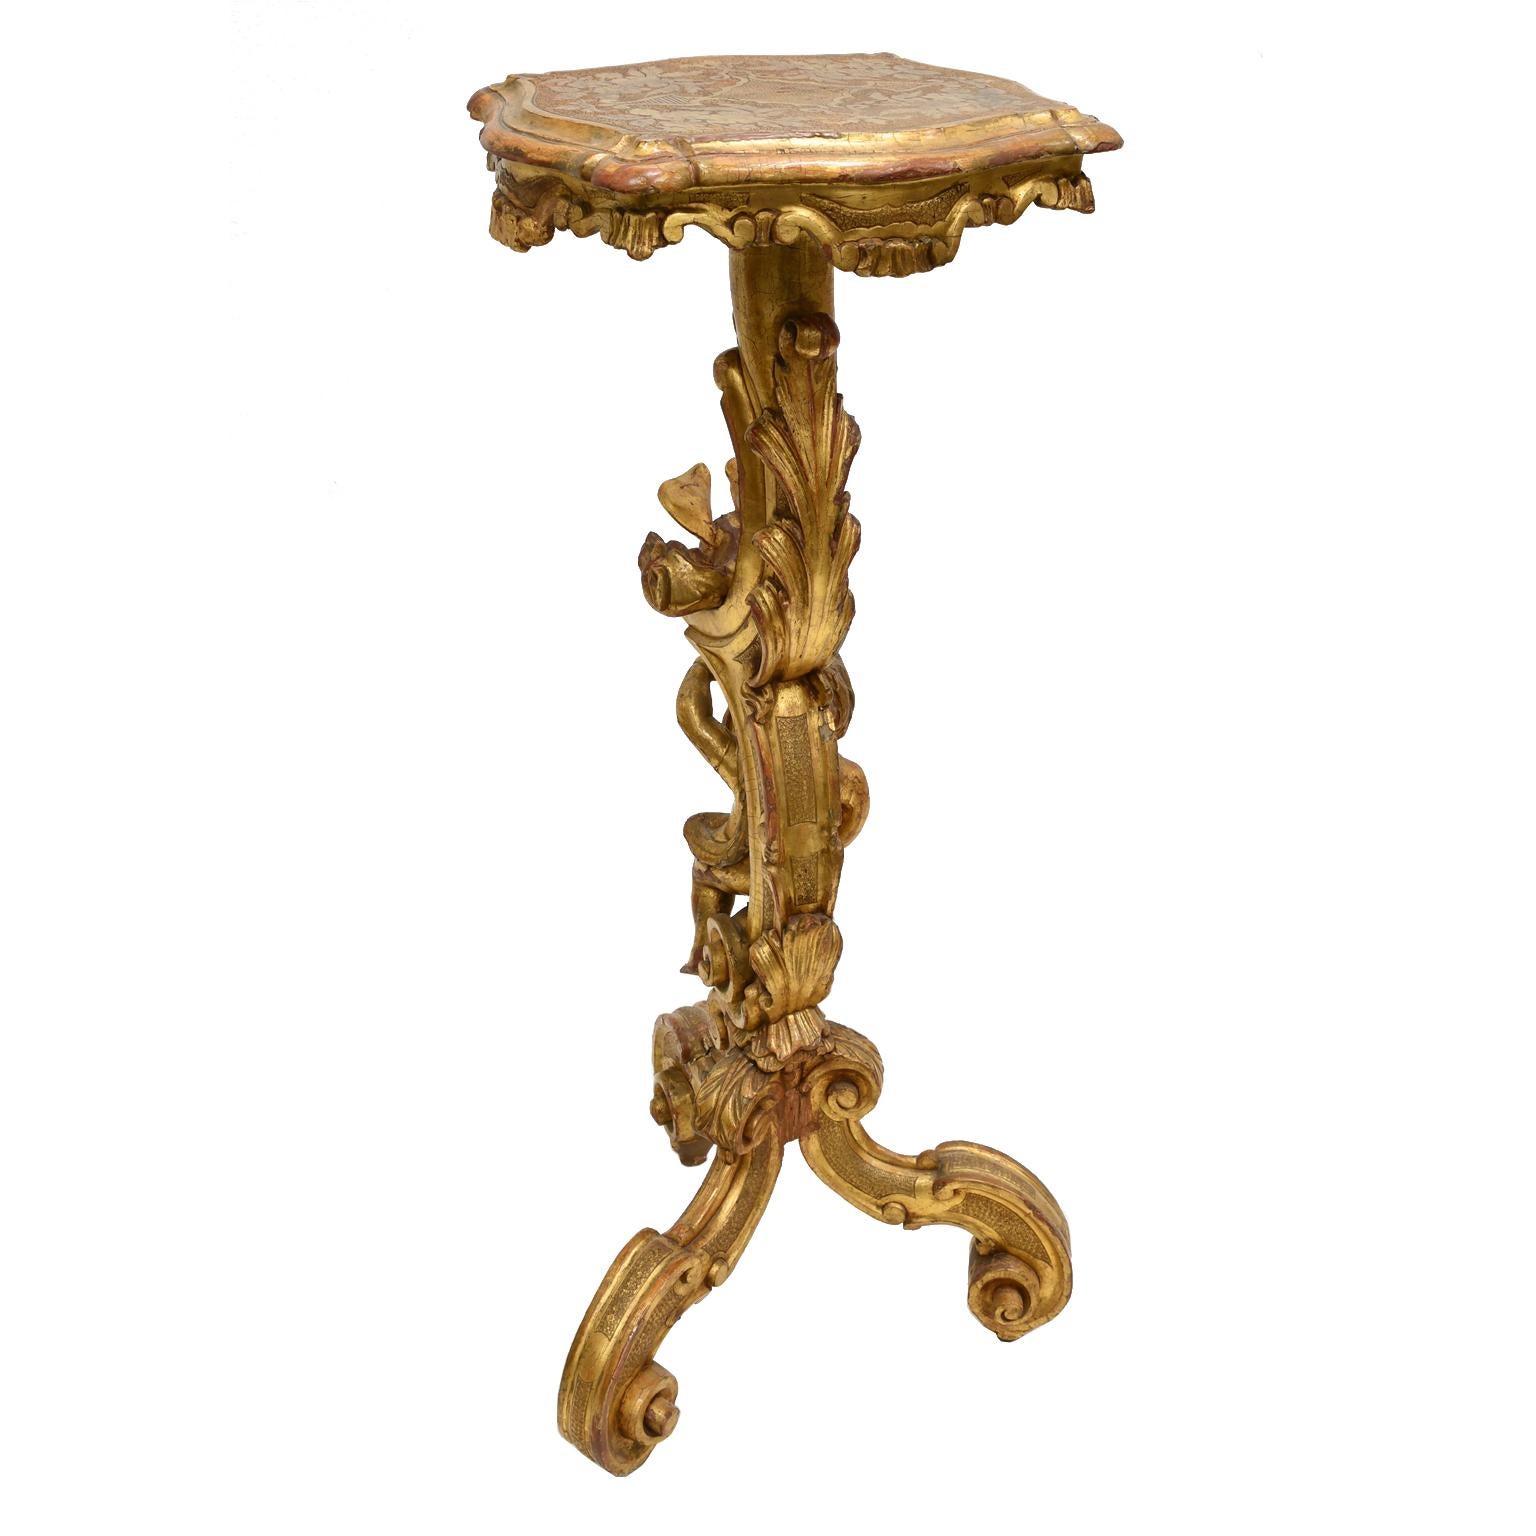 Gesso Antique Venetian Trespolo Pedestal Stand in Gilded Wood w/ Carved Dragon & Putto